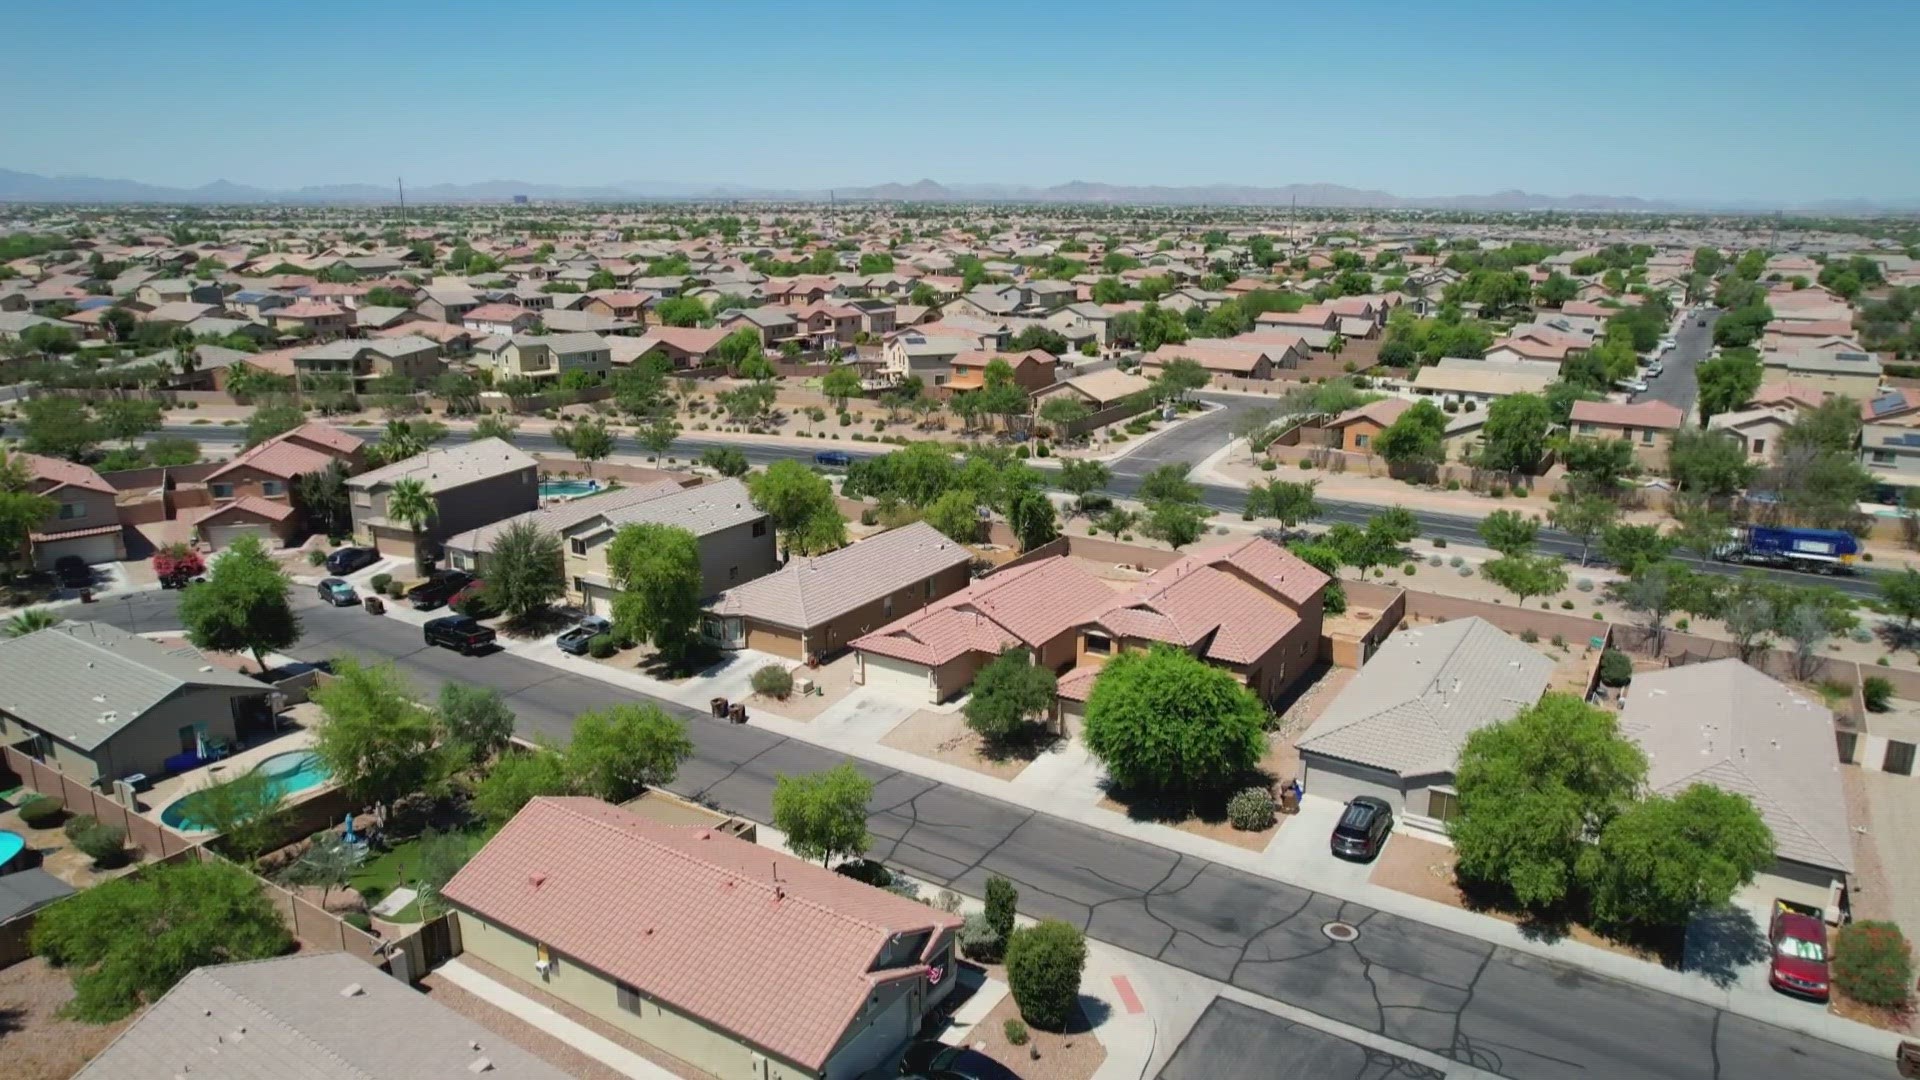 More Maricopa residents raise concerns about quality of new